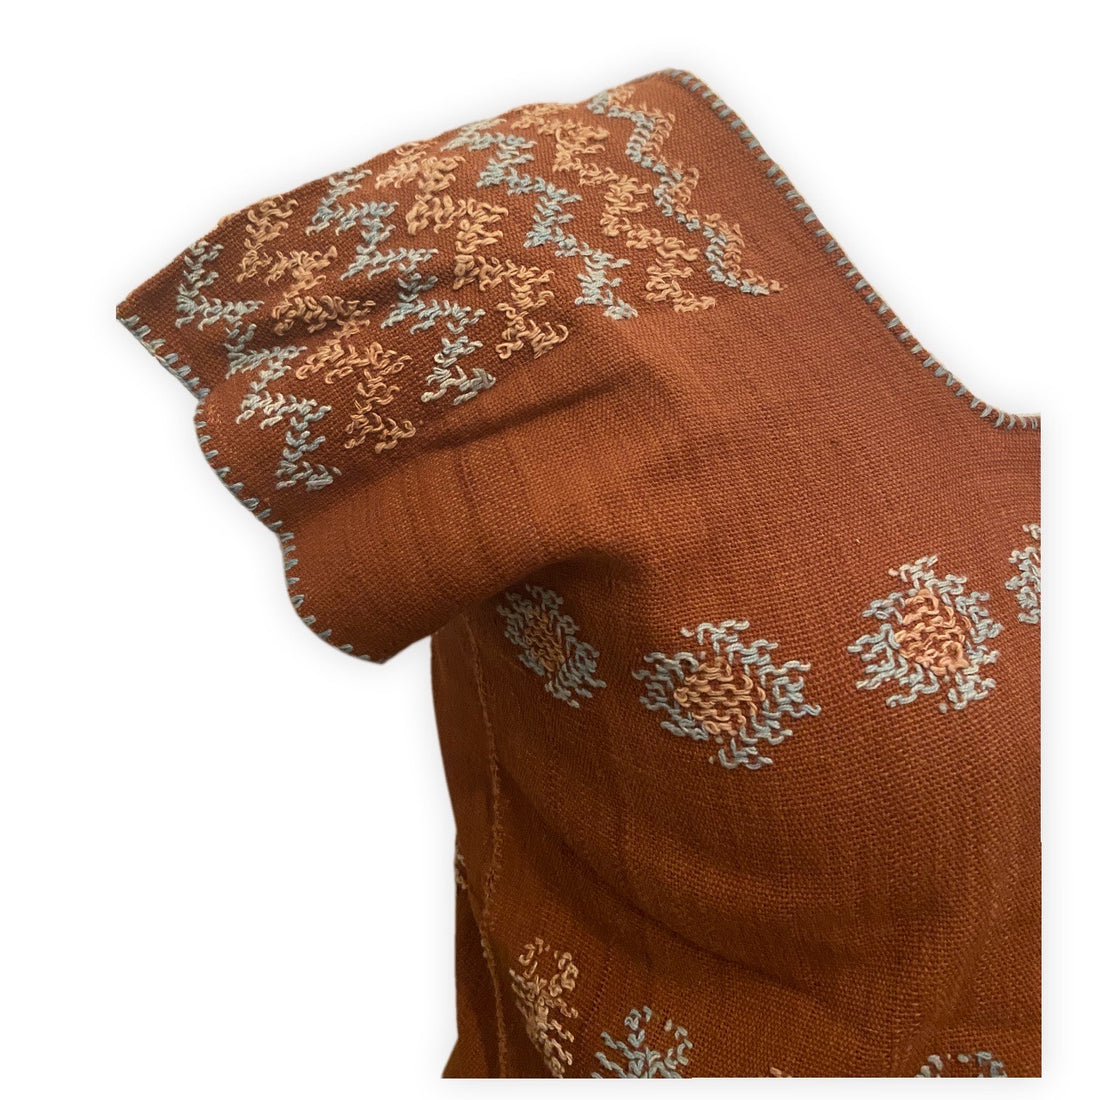 terracotta-colored Hand woven huipil from Oaxaca 